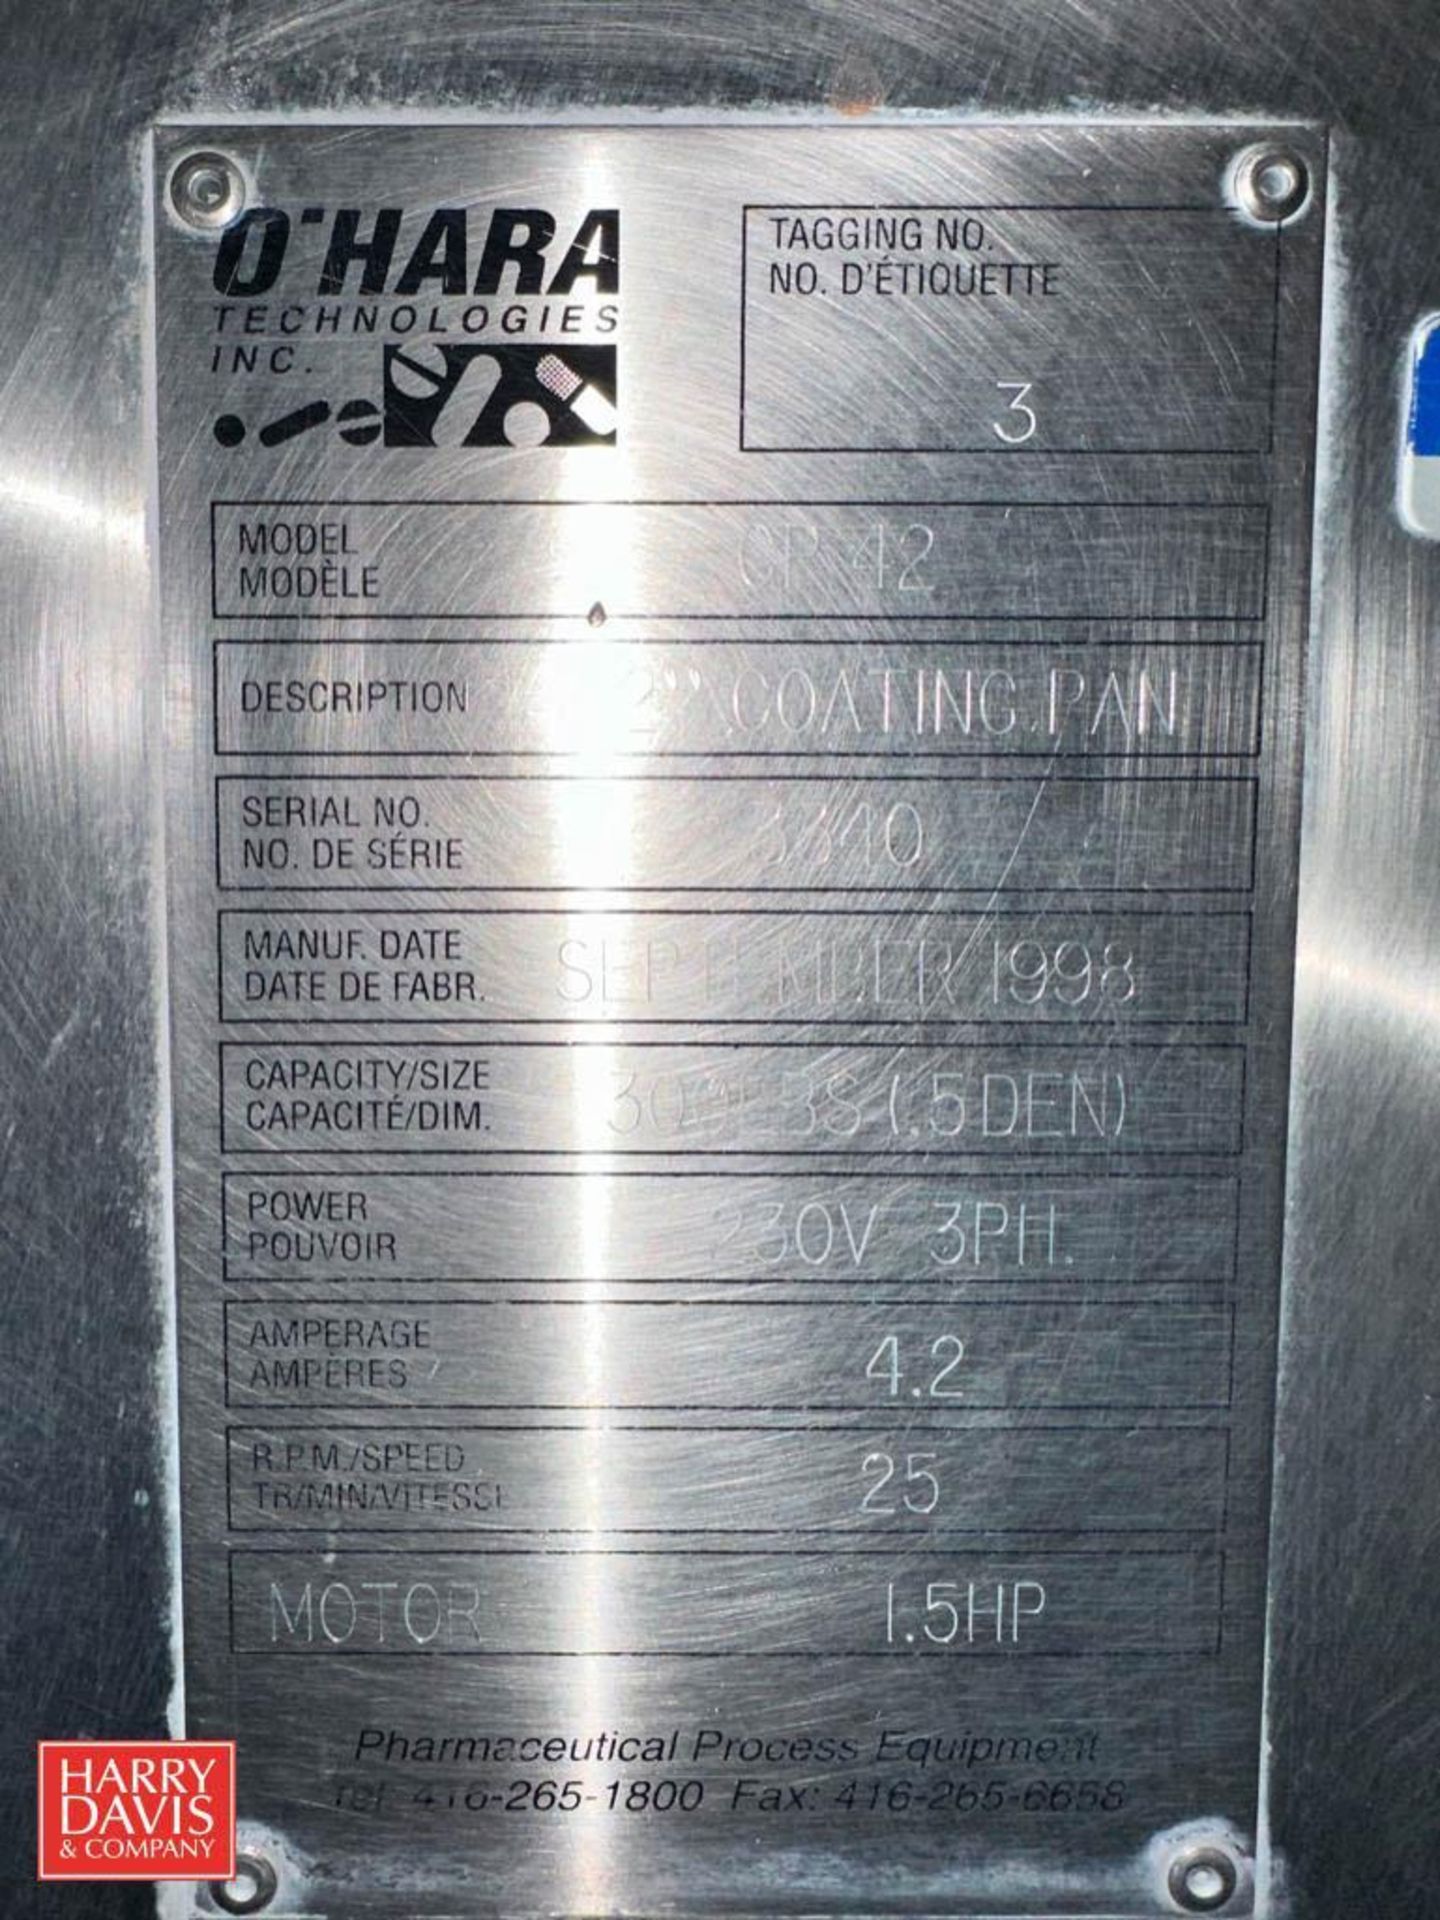 O’Hara S/S 42" Dual-Chamber Coating Pan, Model: CP42, S/N: 3340 and 3340 with (2) Syntron Vibratory - Image 5 of 8